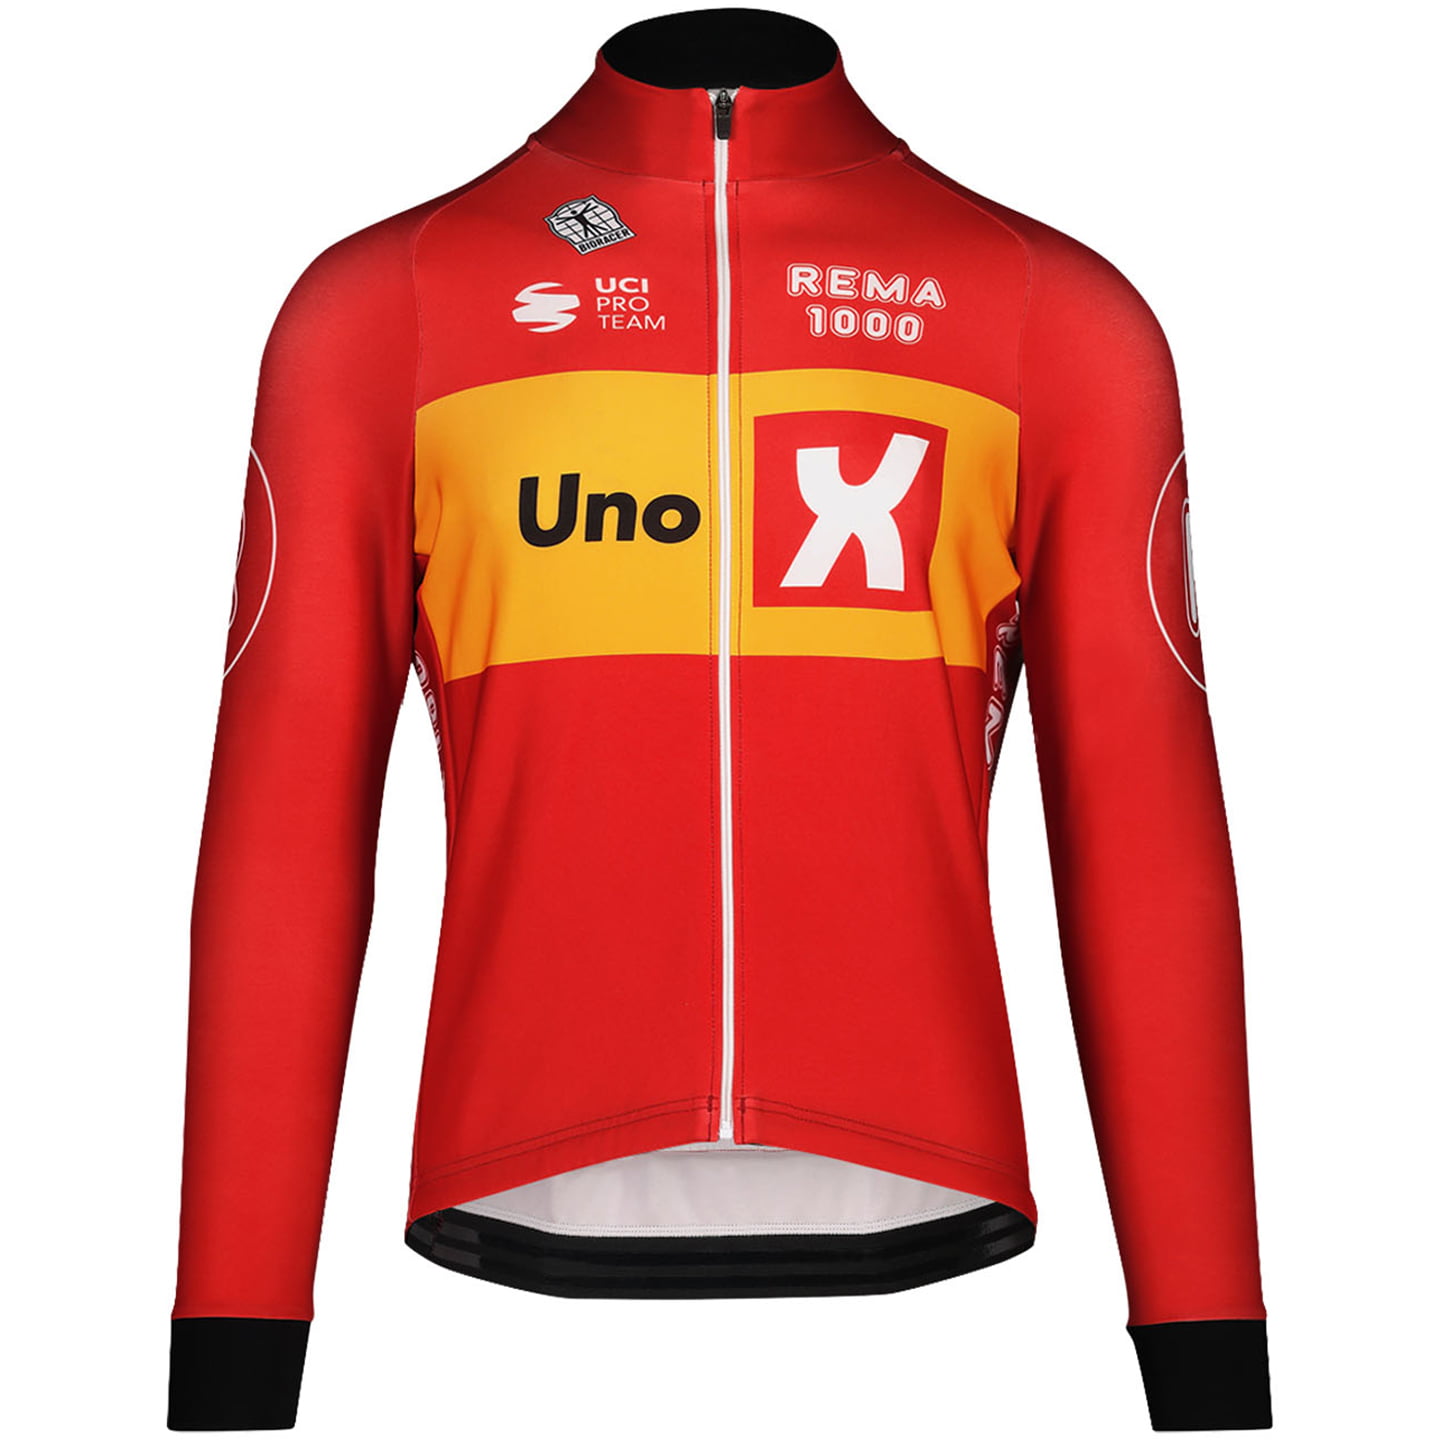 Uno-X Jersey Jacket Icon Tempest TdF 2023 Jersey / Jacket, for men, size M, Winter jacket, Cycle clothing